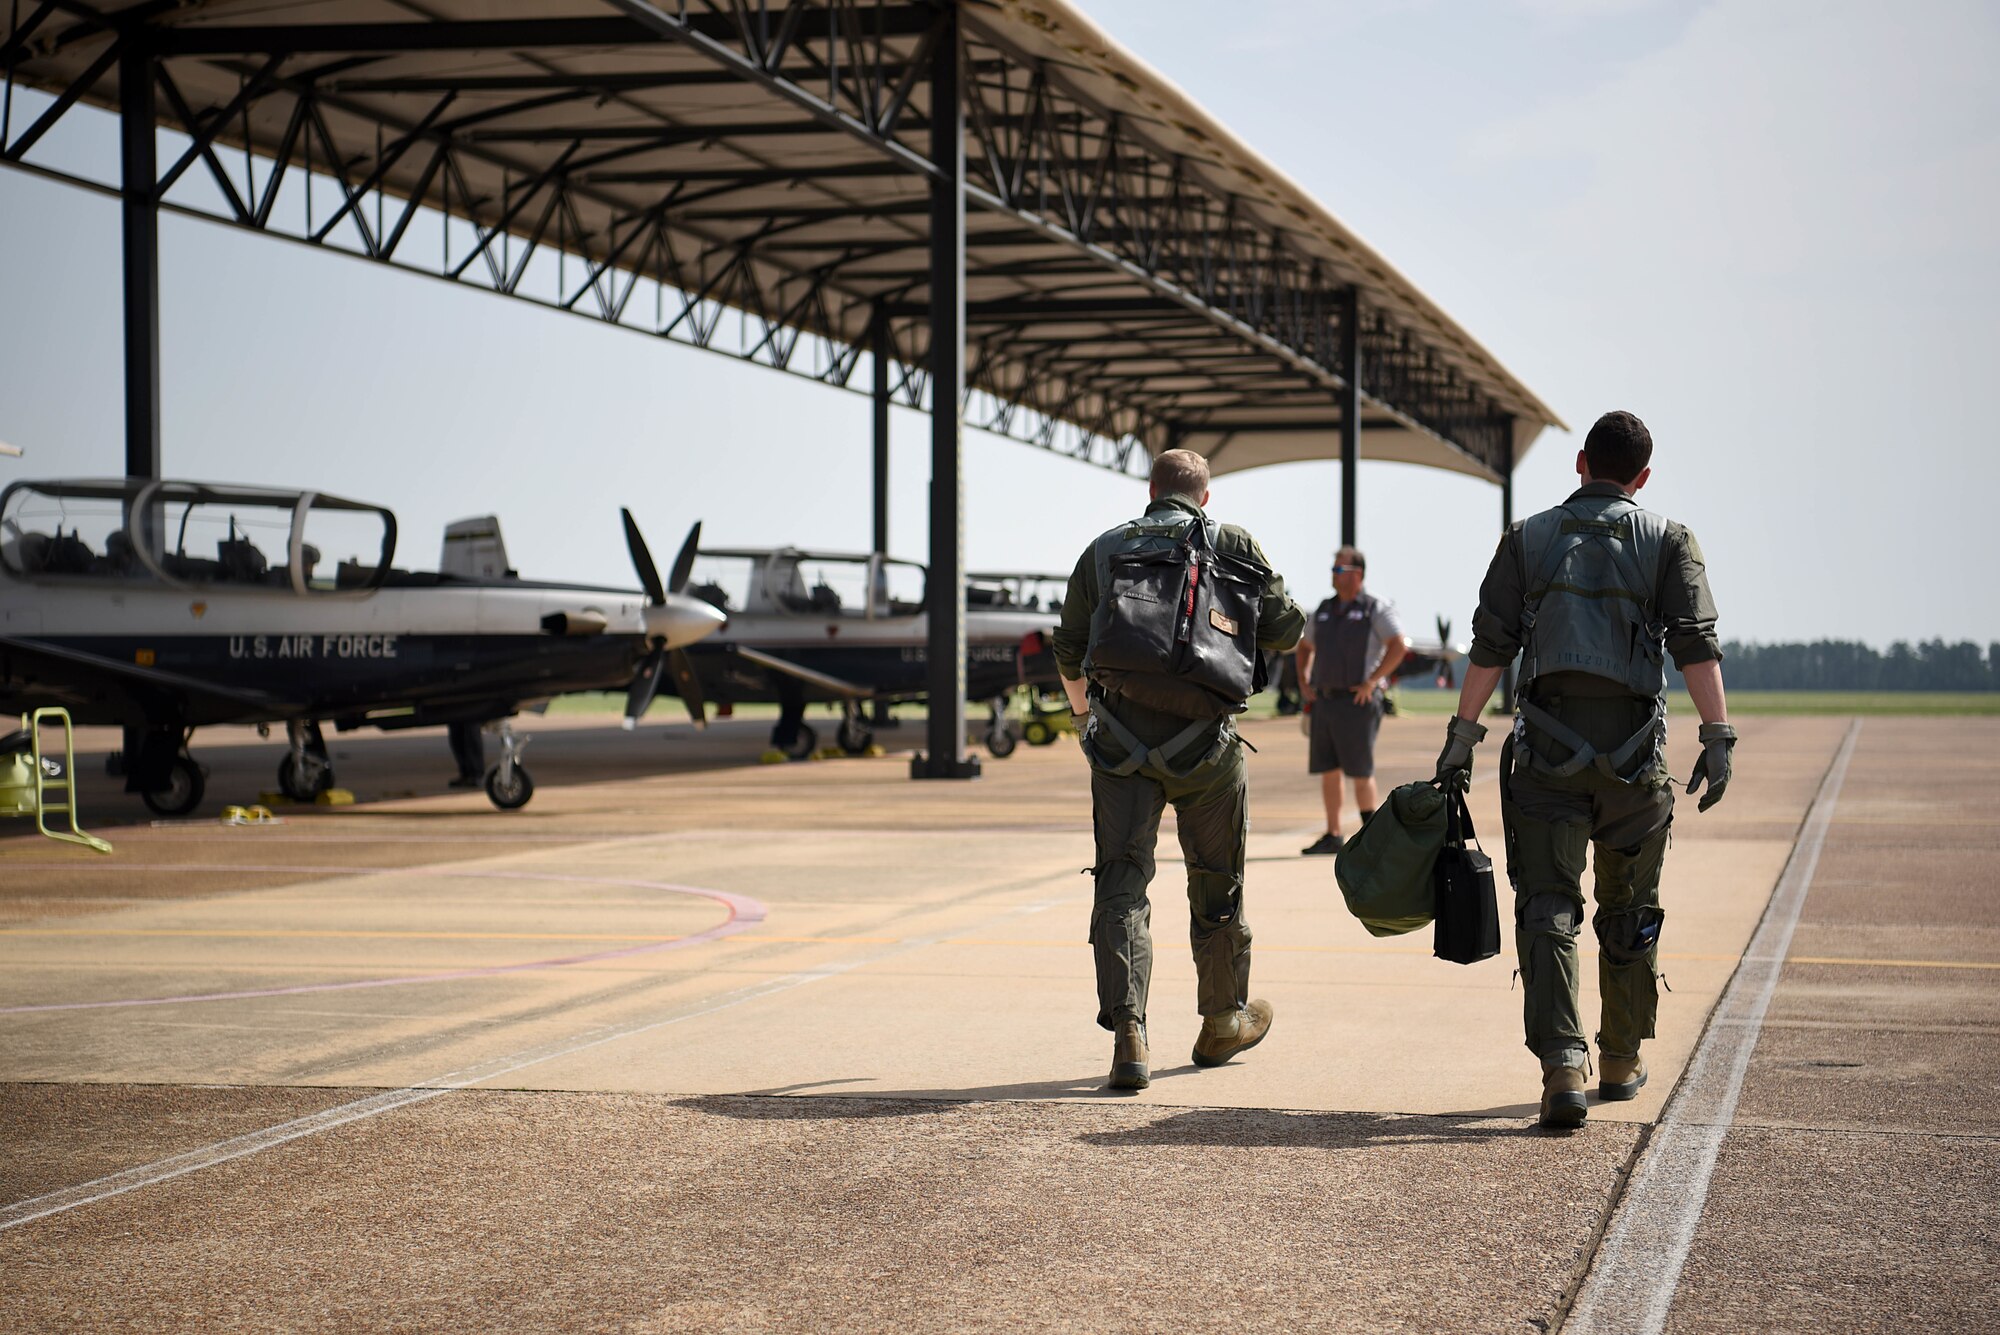 Capt. Conor Murphy, 41st Flying Training Squadron instructor pilot, and 2nd Lt. Cameron Duley, 41st FTS student pilot, step to their assigned aircraft July 2, 2018, on Columbus Air Force Base, Mississippi. The 41st FTS is responsible for training roughly half of all student pilots at the 14th Flying Training Wing. (U.S. Air Force photo by Airman 1st Class Keith Holcomb)